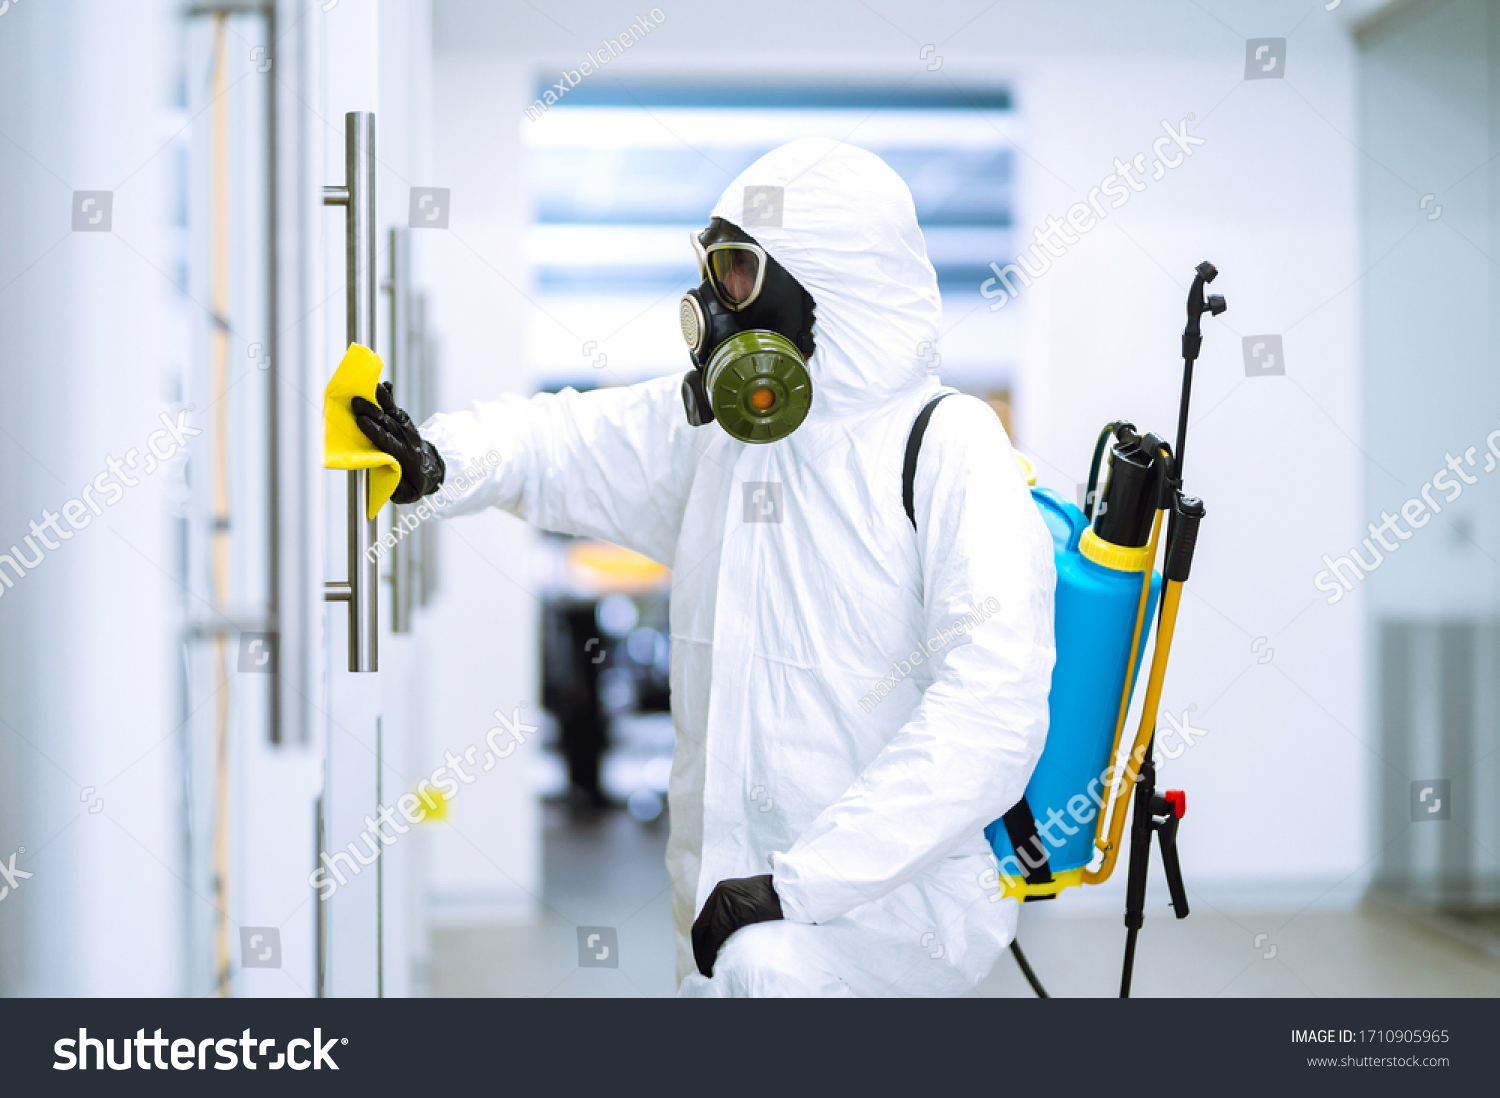 Cleaning and disinfection of office to prevent COVID-19, Man in protective hazmat suit washes office furniture to preventing the spread of coronavirus, pandemic in quarantine city. #1710905965